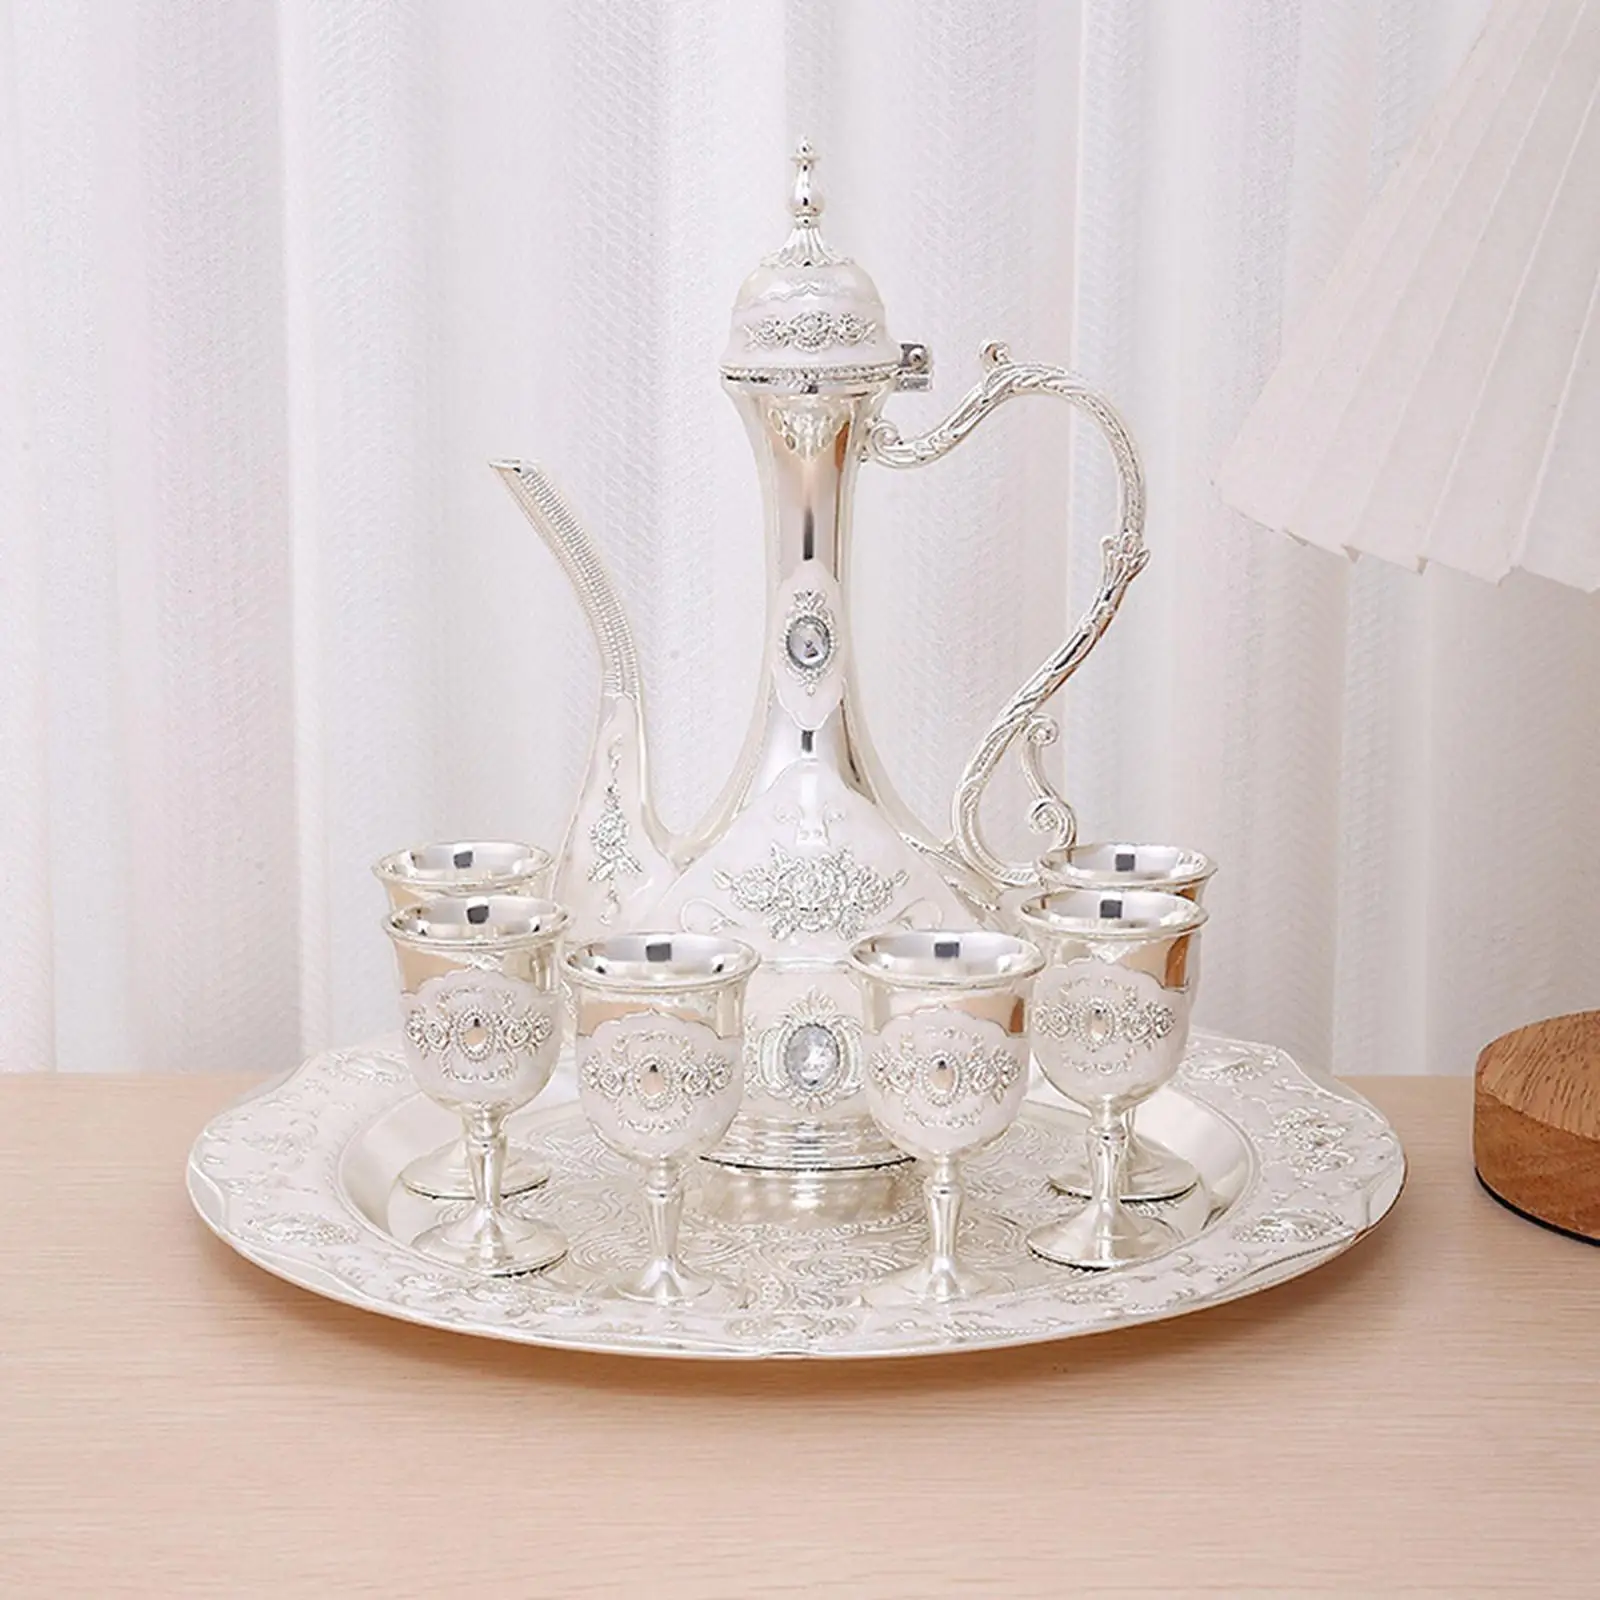 Metal Teapot Set and Tray Crafts with 6 Coffee Cup for Home Bar Tea Party Decor Birthday Gift